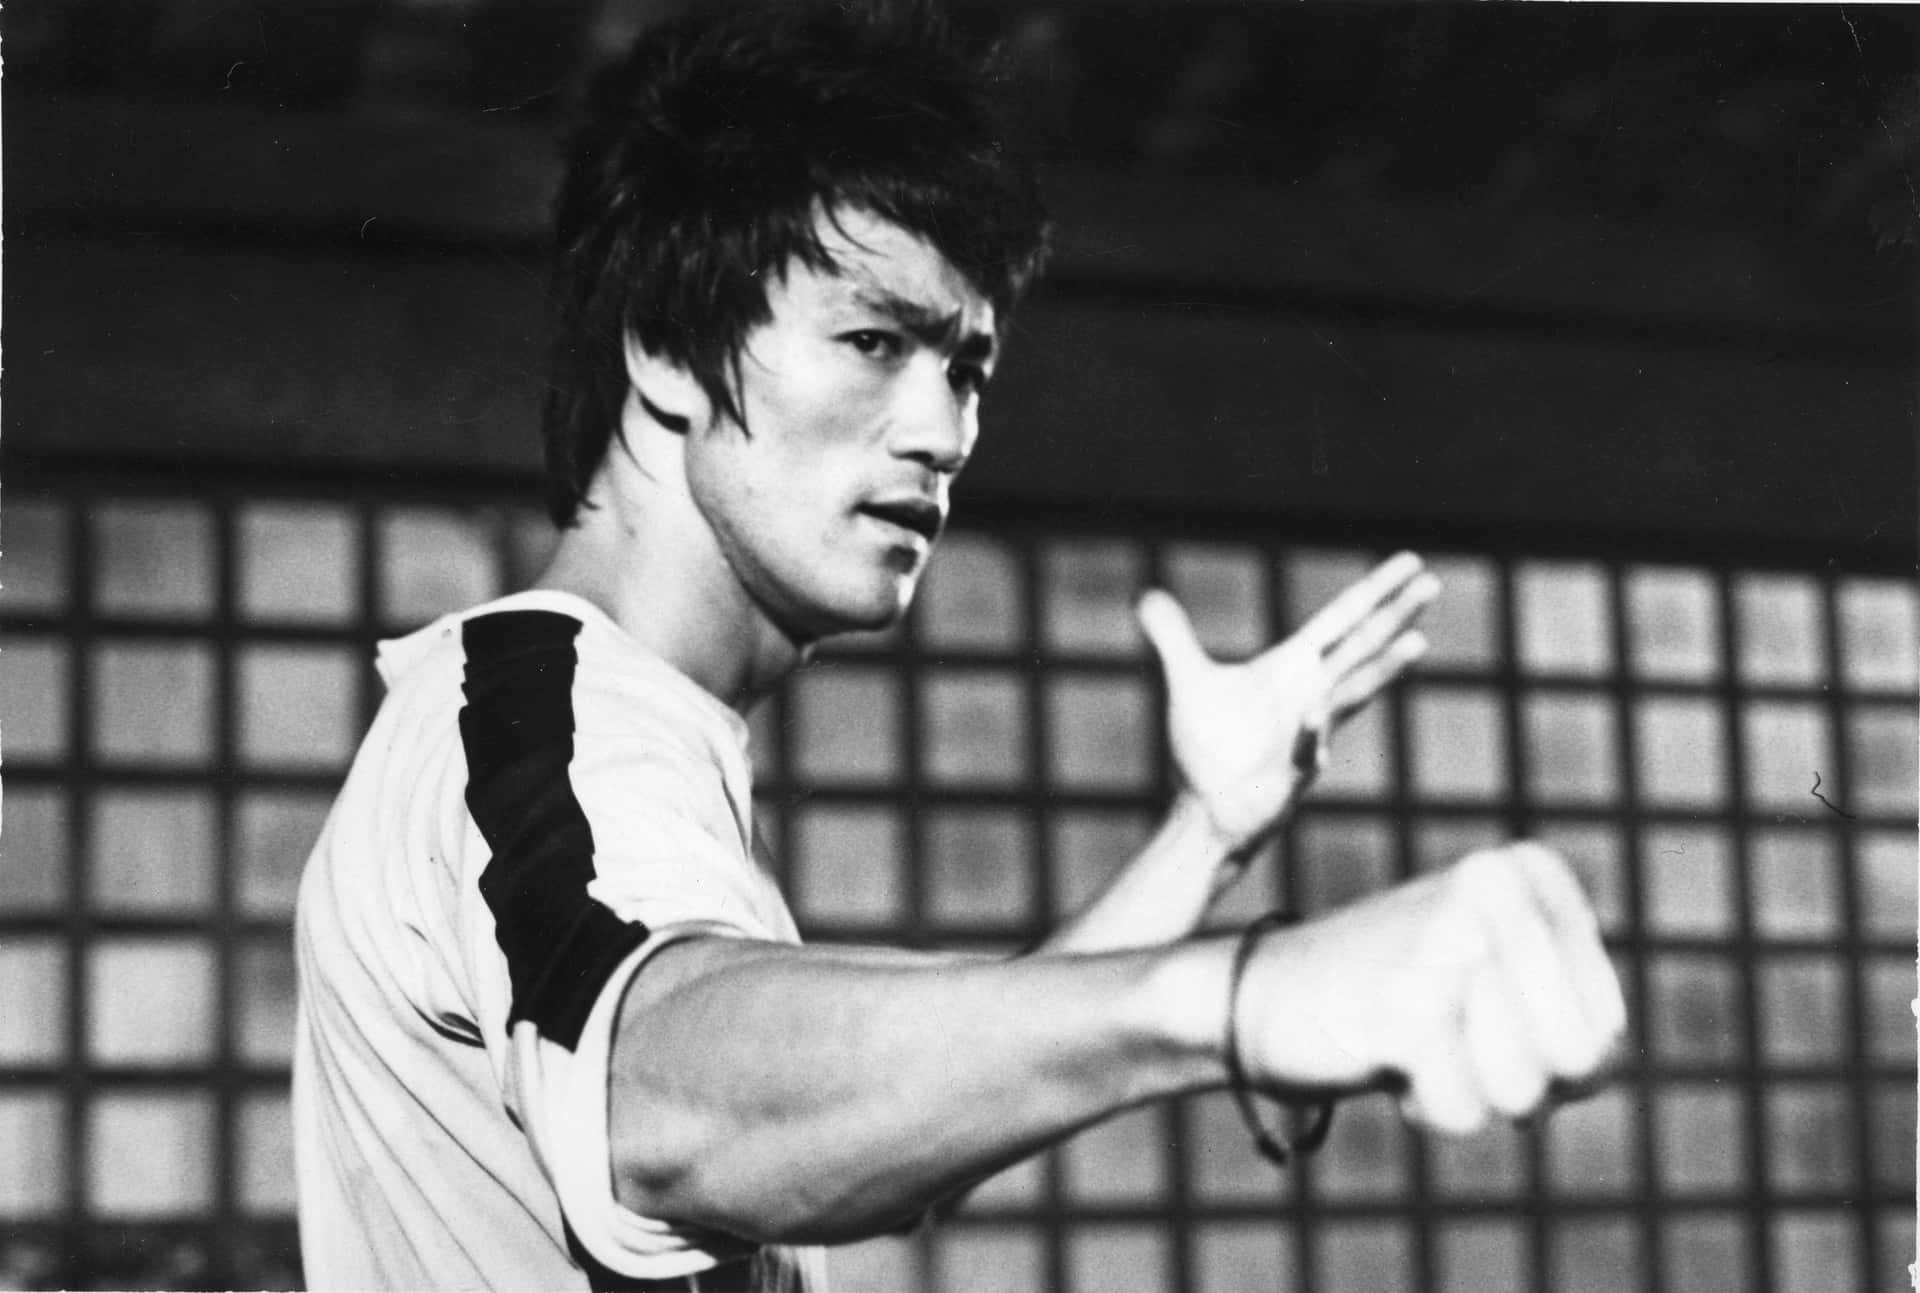 "Be movement and you will find your power" - Bruce Lee